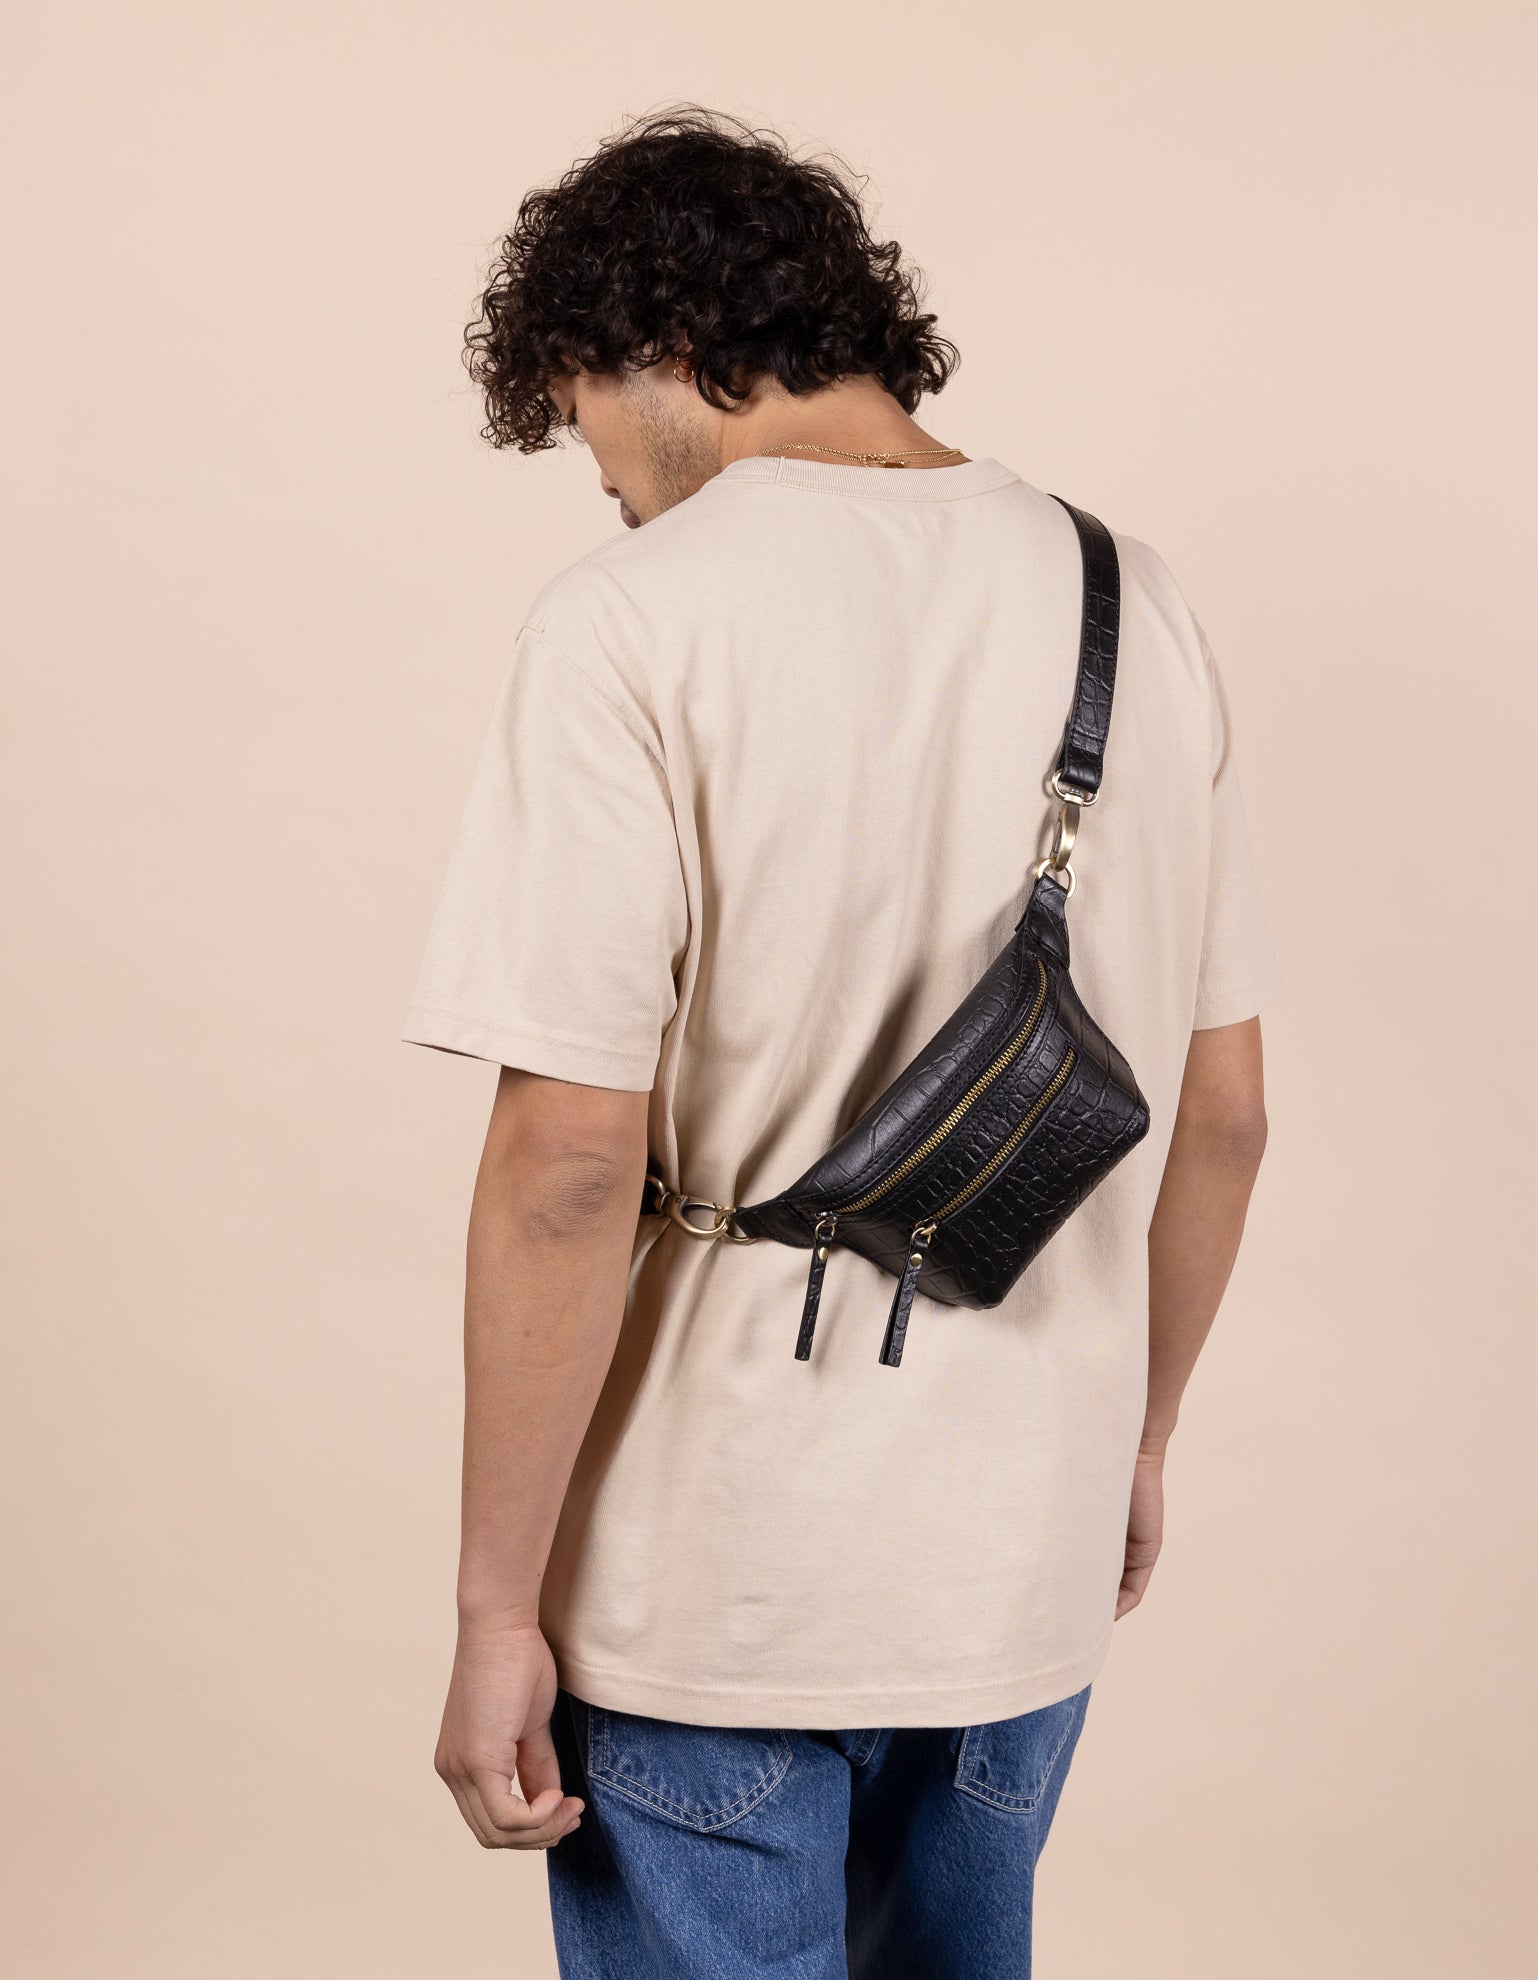 Becks Bum Bag in Black Croco Leather - male model product image. Back view